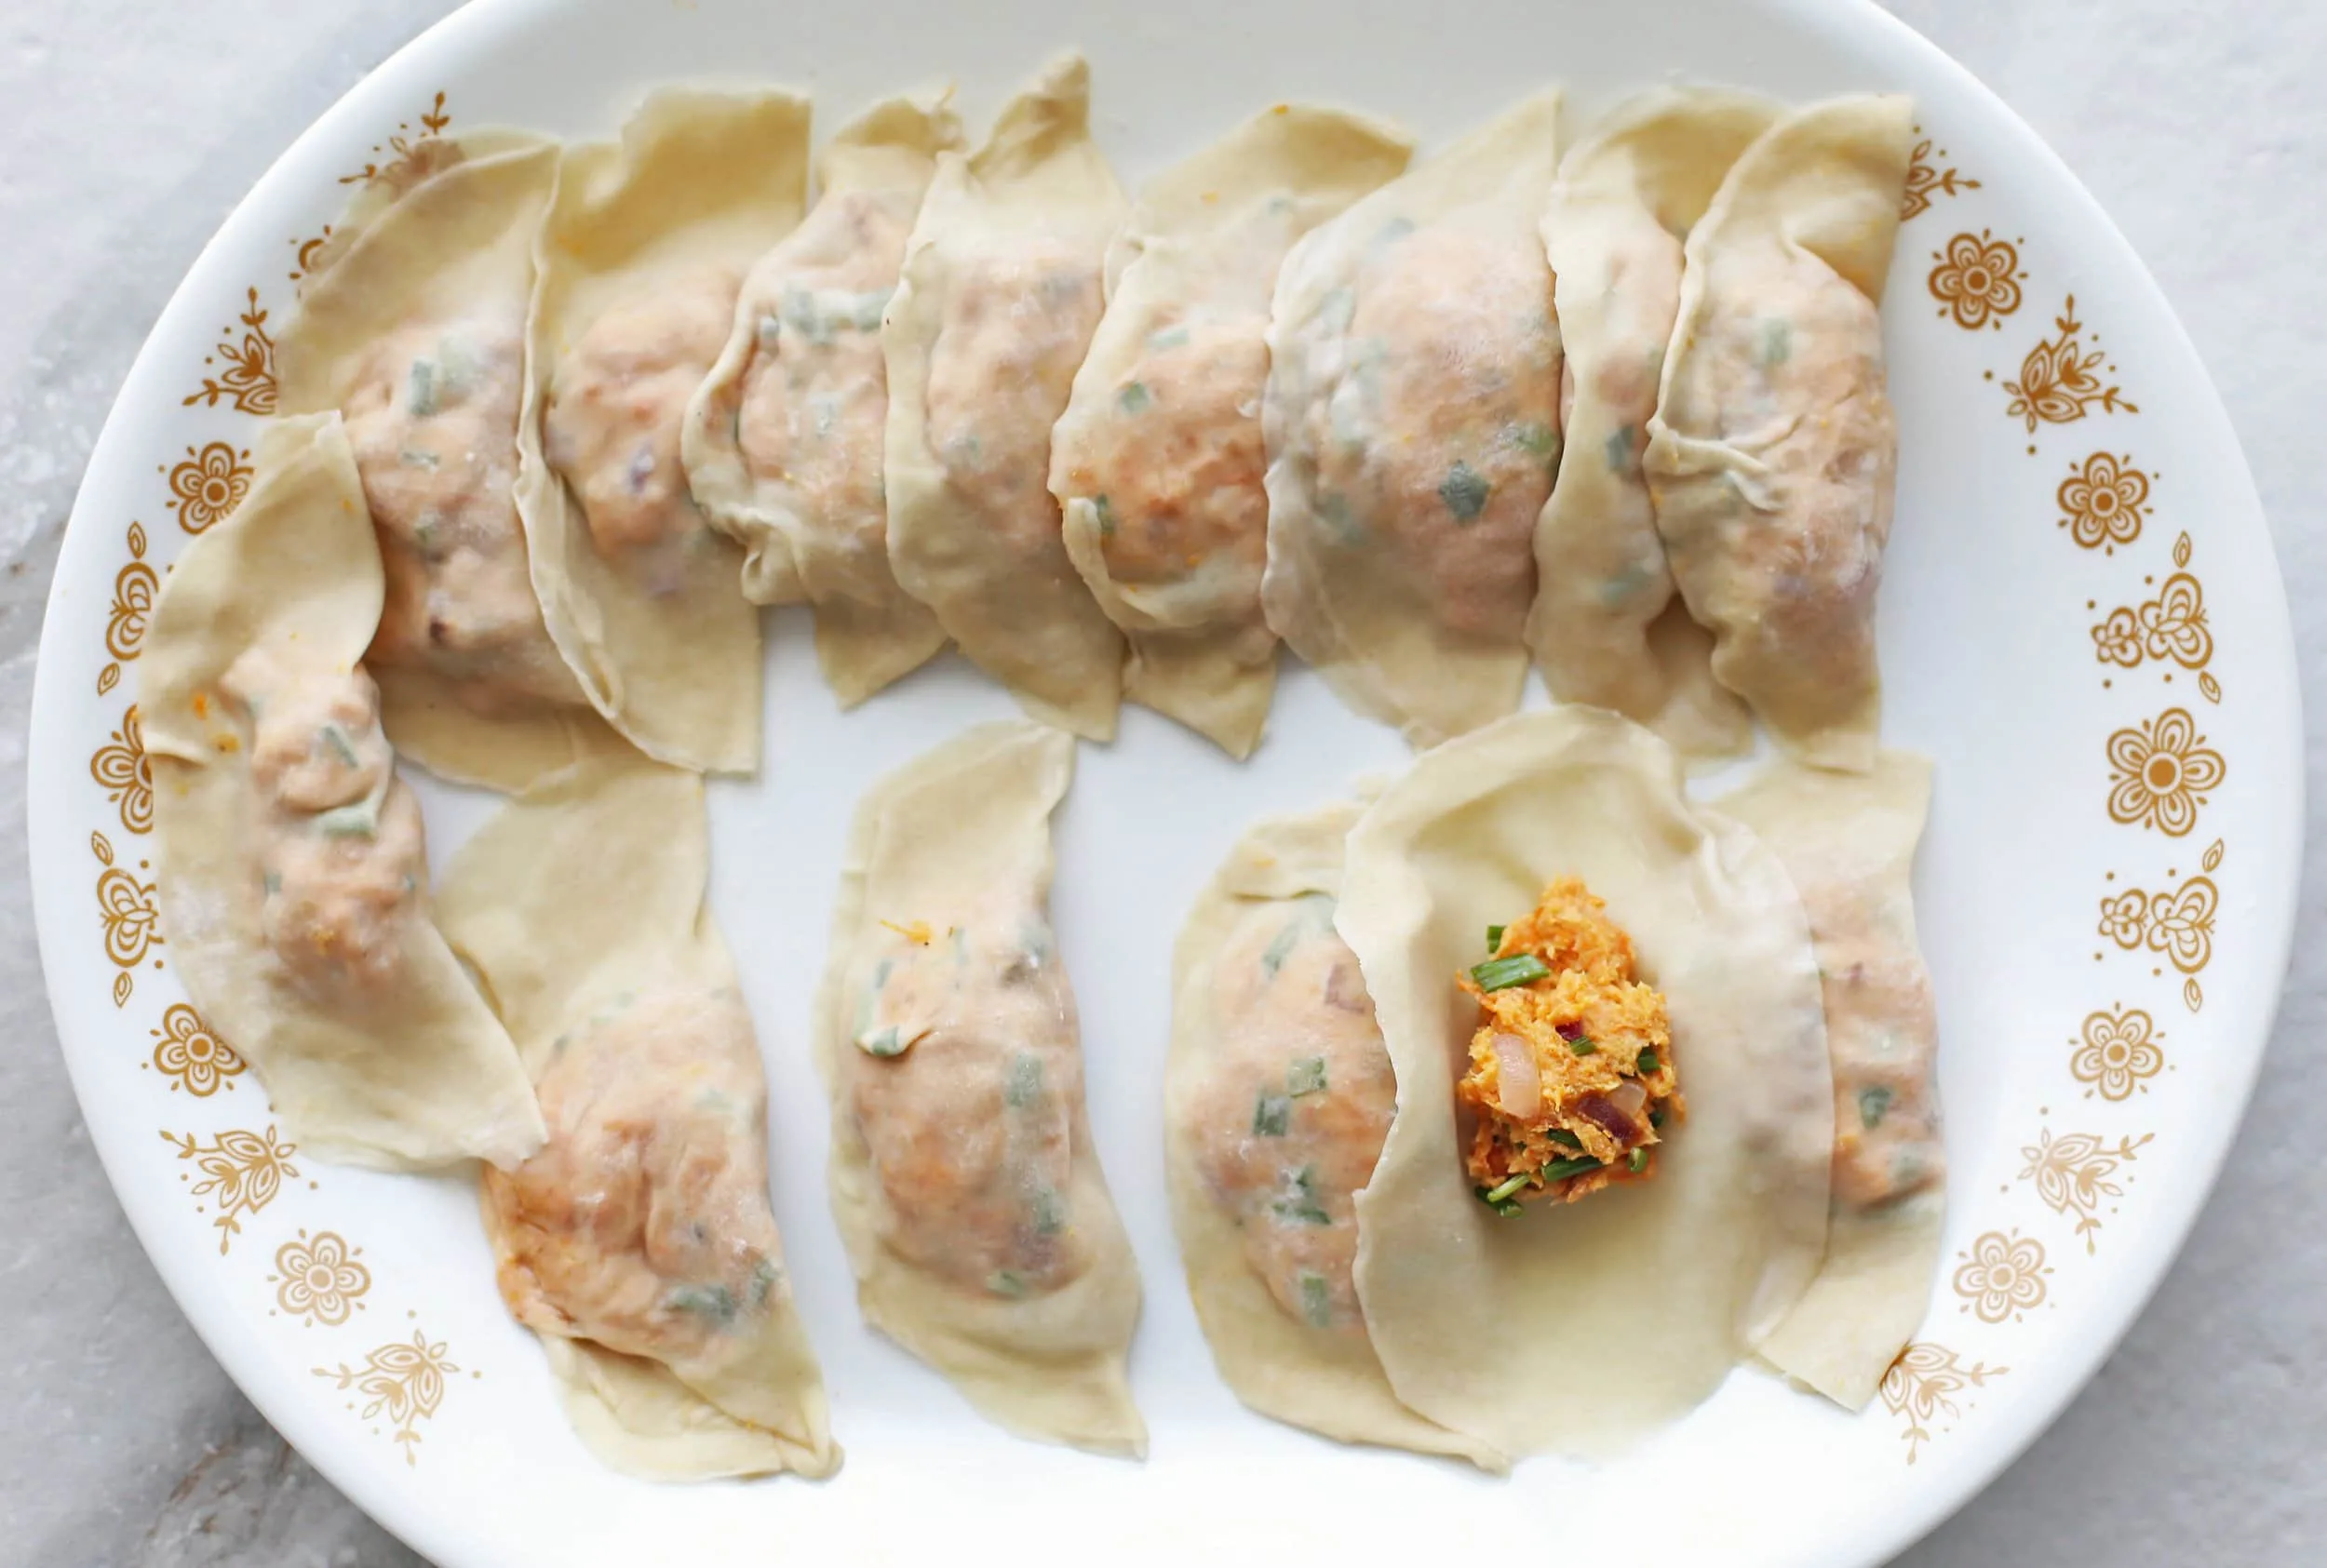 Dumpling wrappers filled sweet potato cream cheese filling.